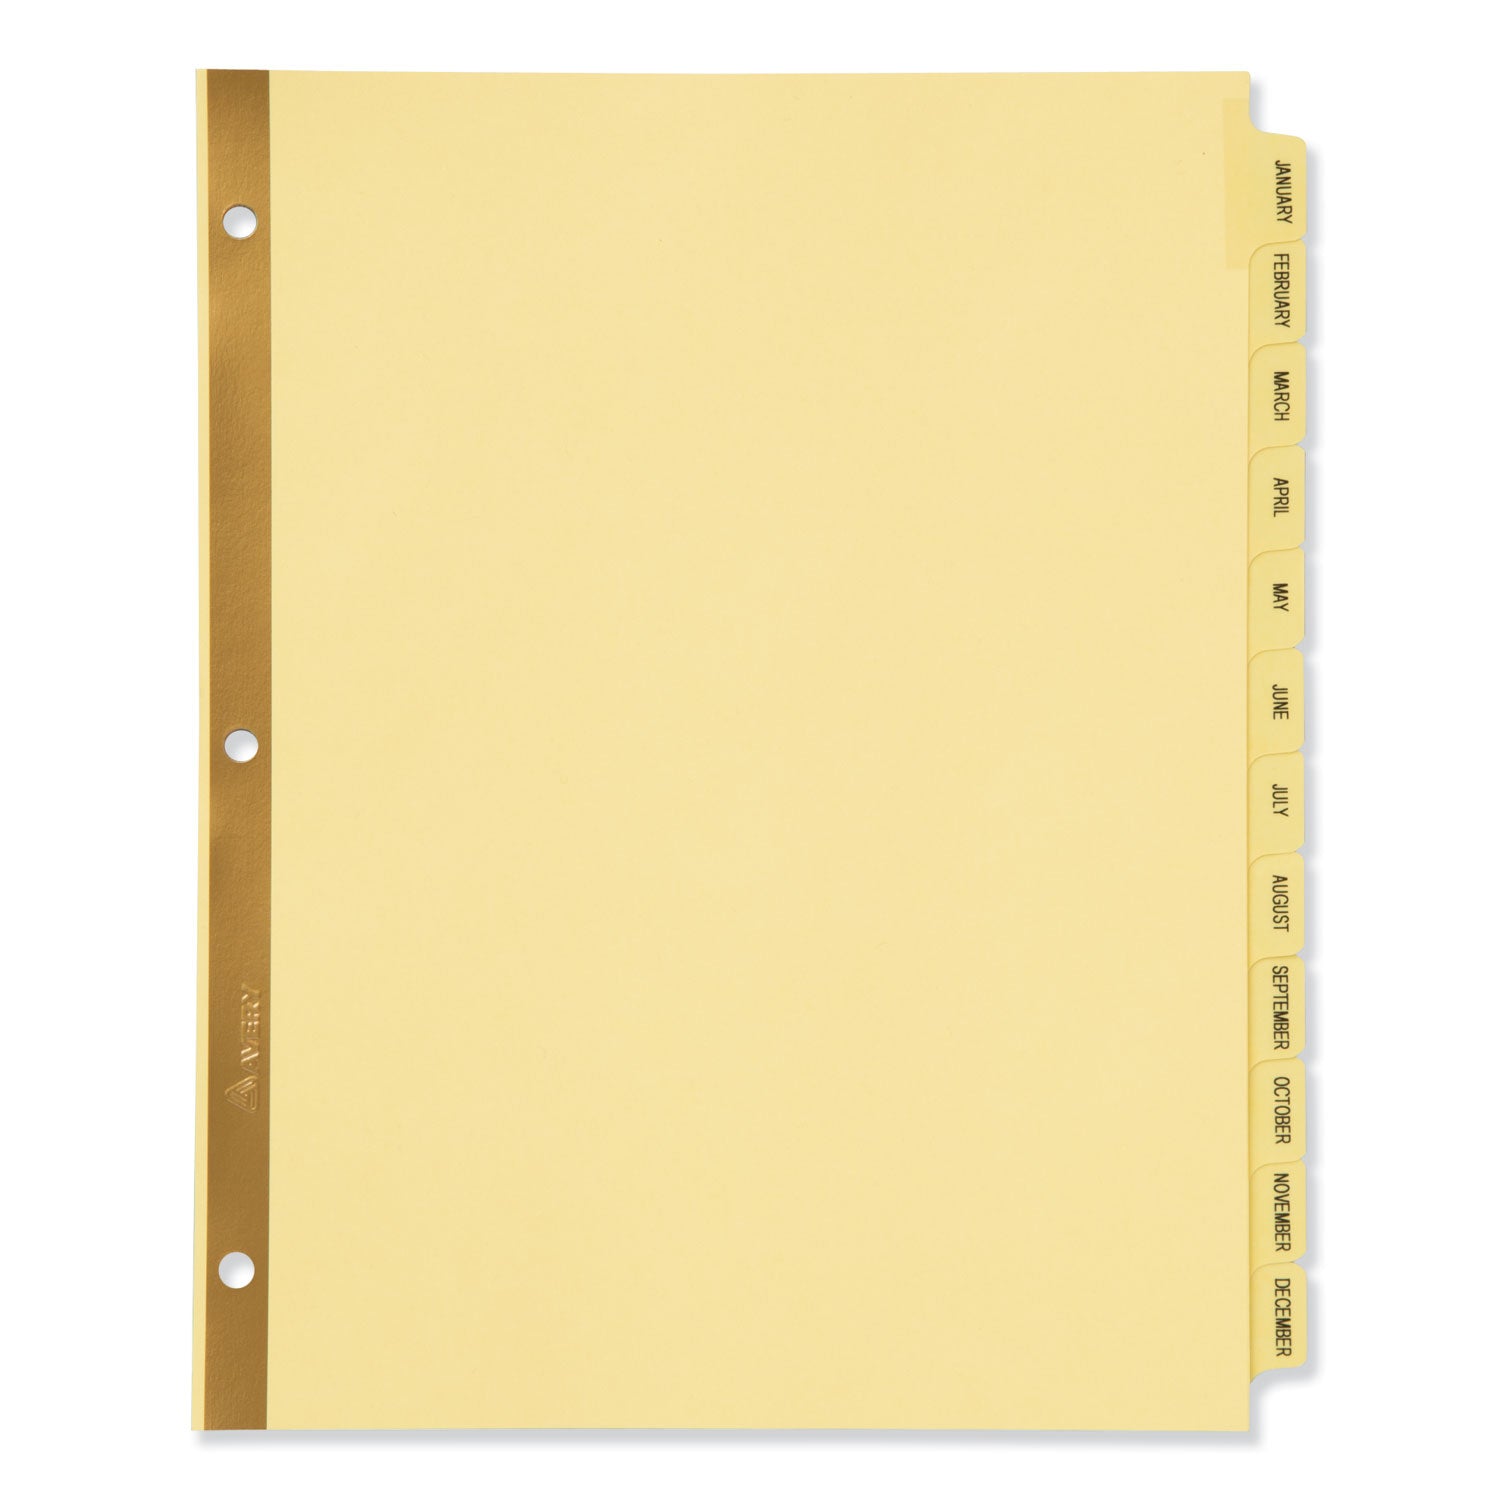 Preprinted Laminated Tab Dividers with Gold Reinforced Binding Edge, 12-Tab, Jan. to Dec., 11 x 8.5, Buff, 1 Set - 